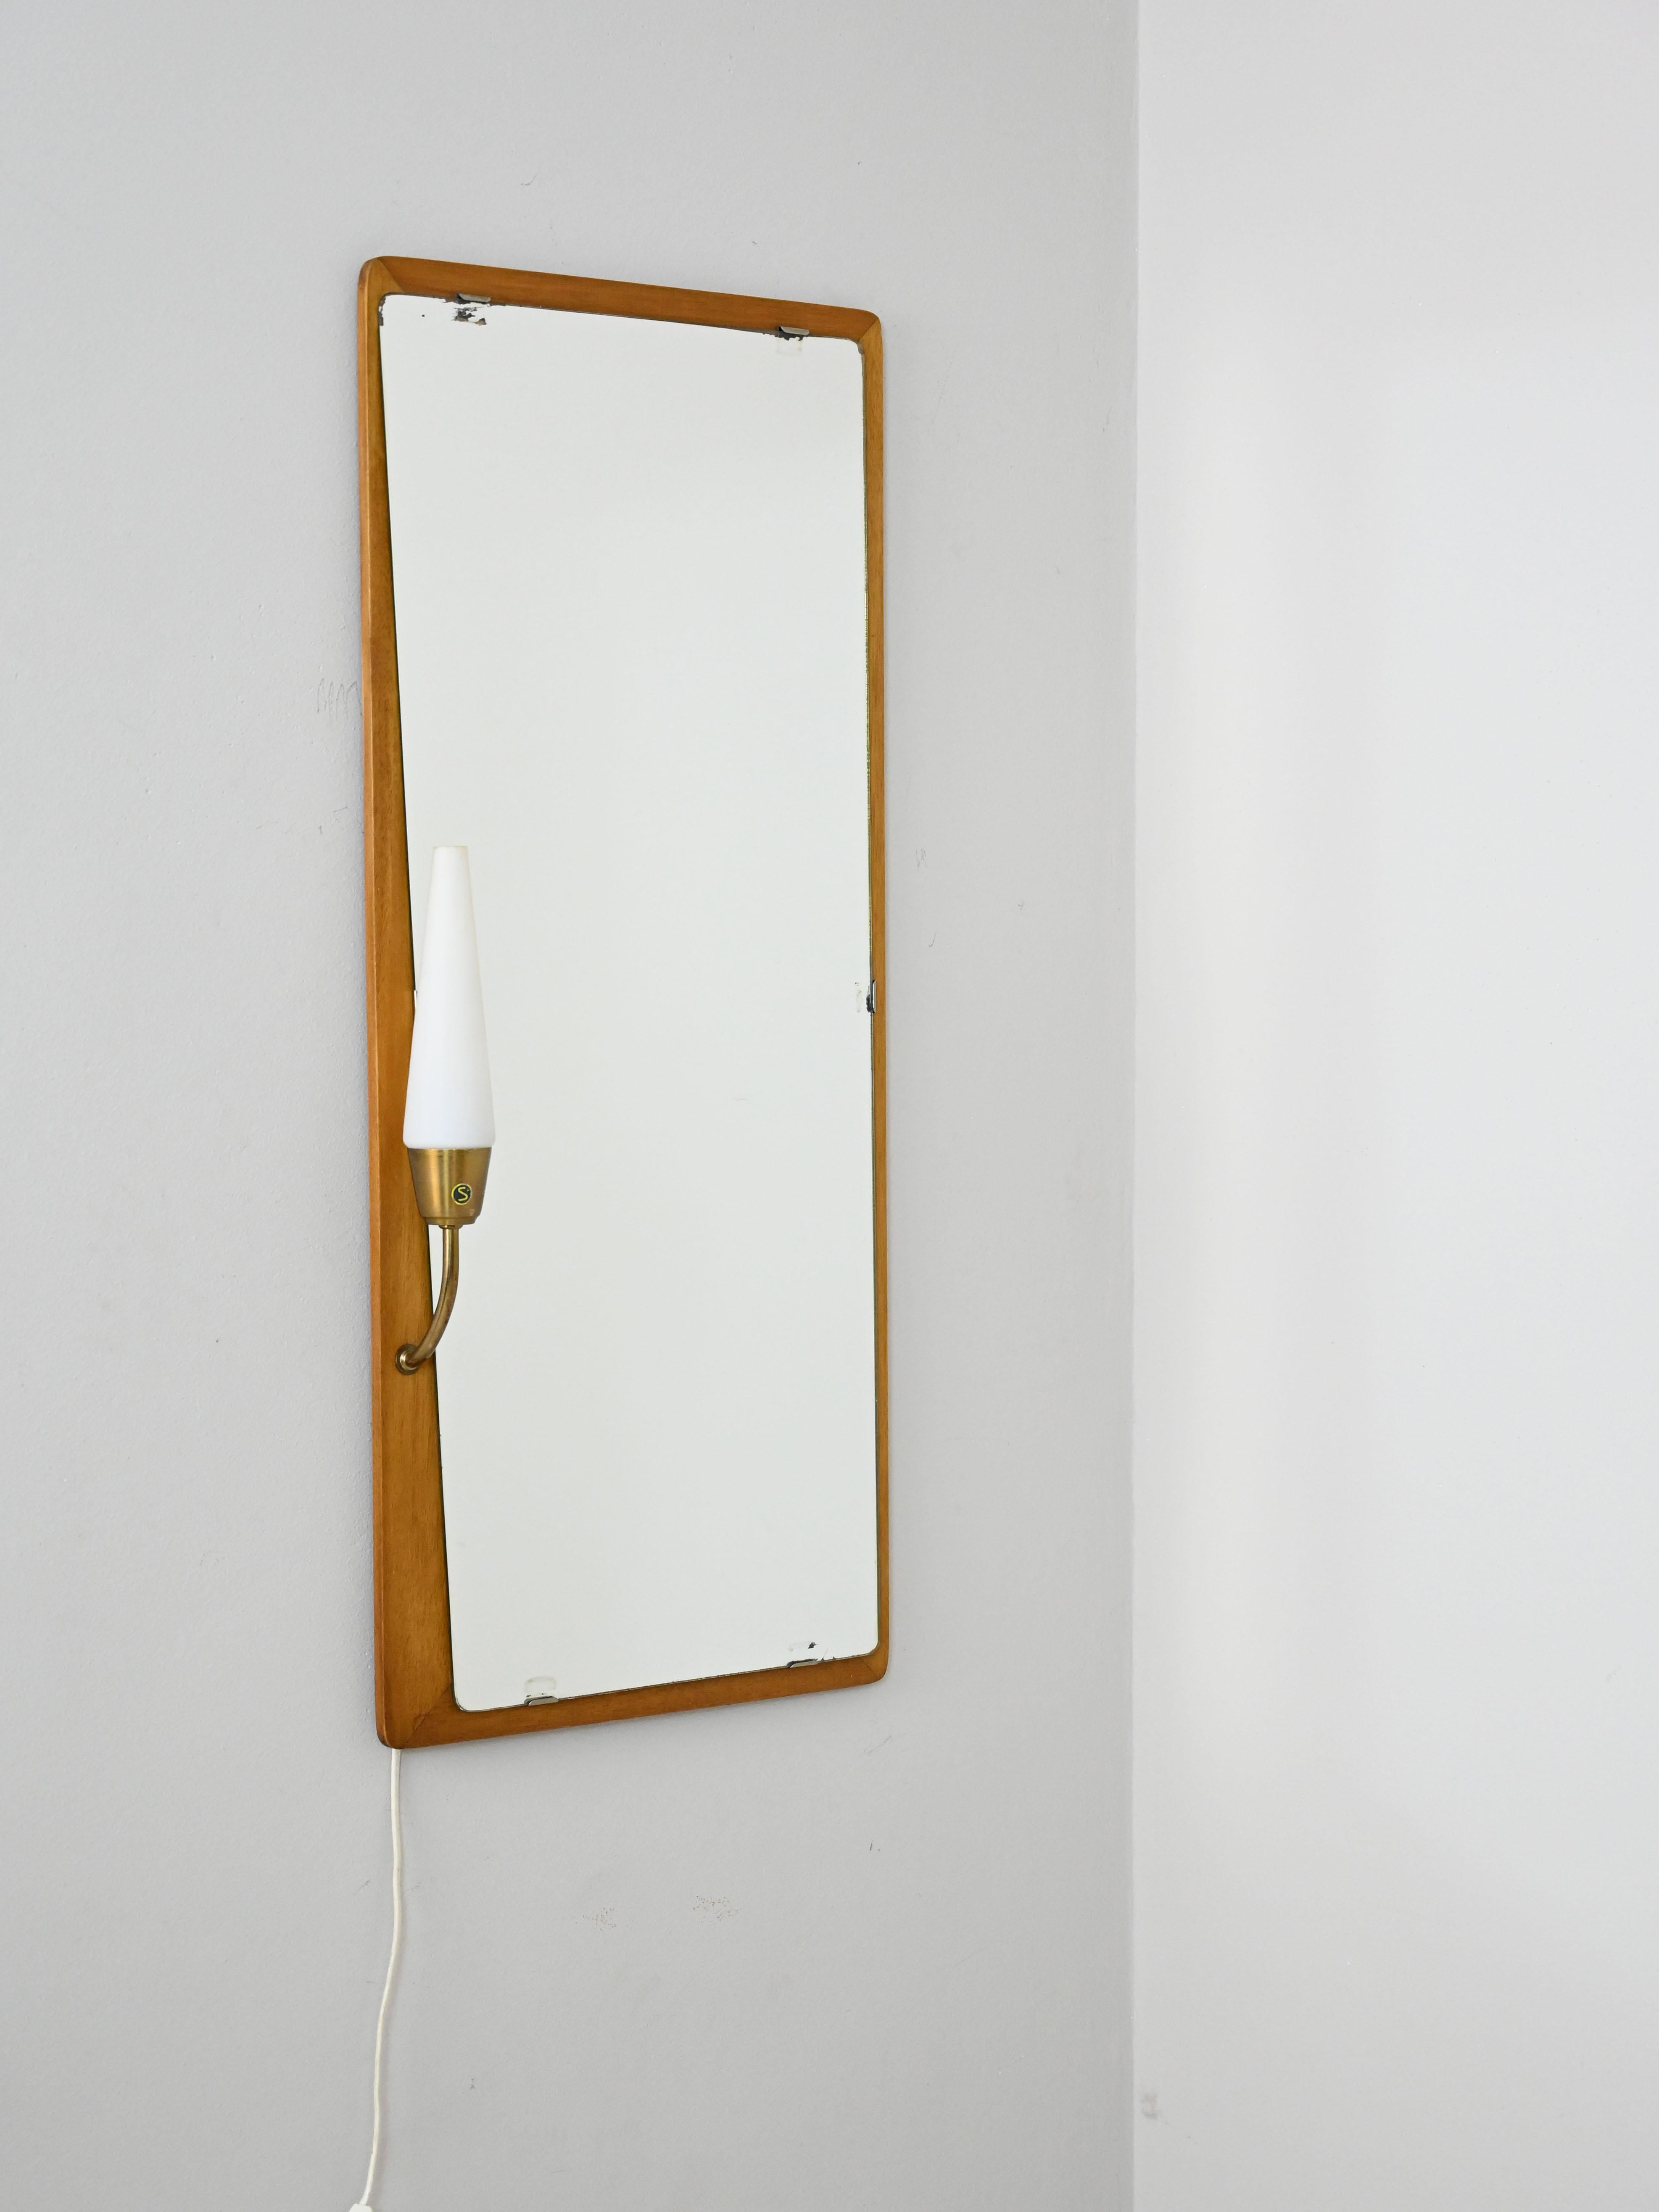 Vintage 1960s mirror equipped with lighting.

An original complement with classic lines typical of the period.
The teak frame has a light point consisting of a gilded metal stand and an opaline glass shade.
Perfect as an entryway or bathroom